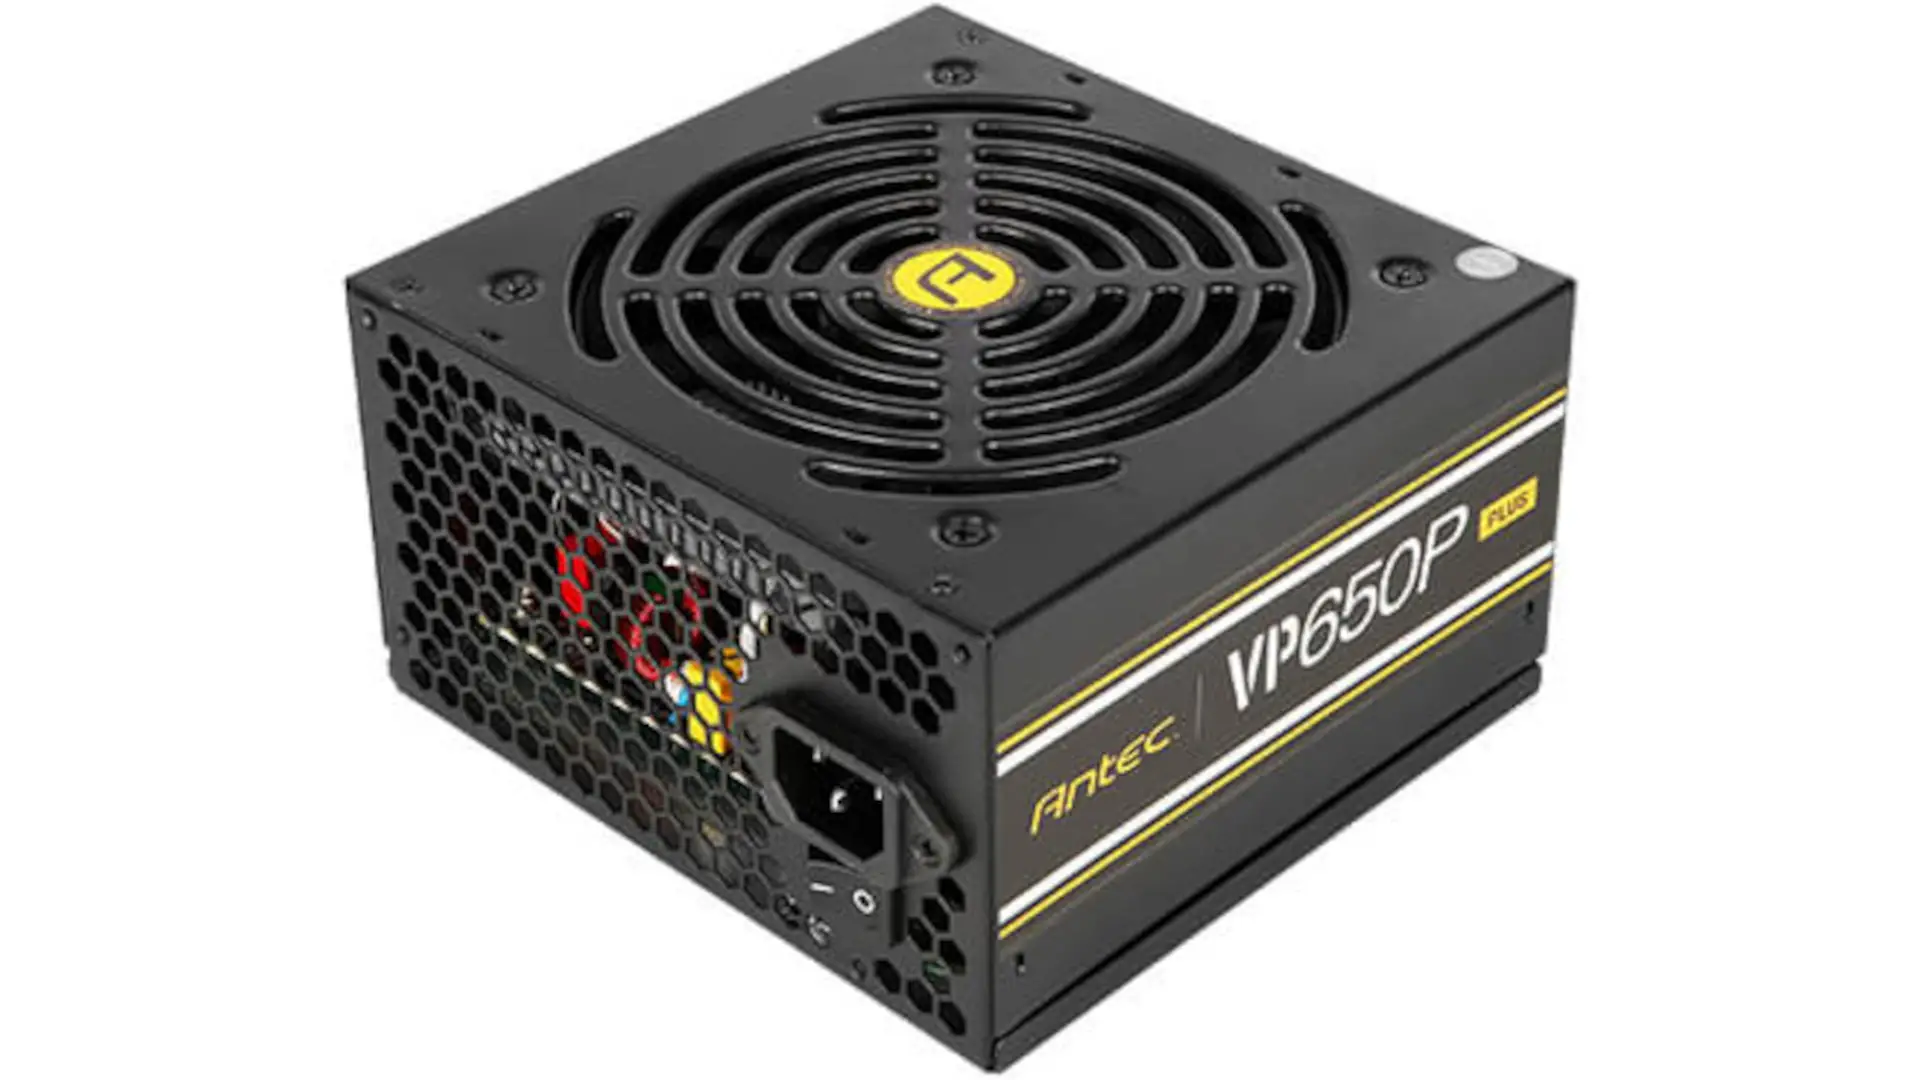 You are currently viewing ANTEC VP650P PLUS Power Supply Review